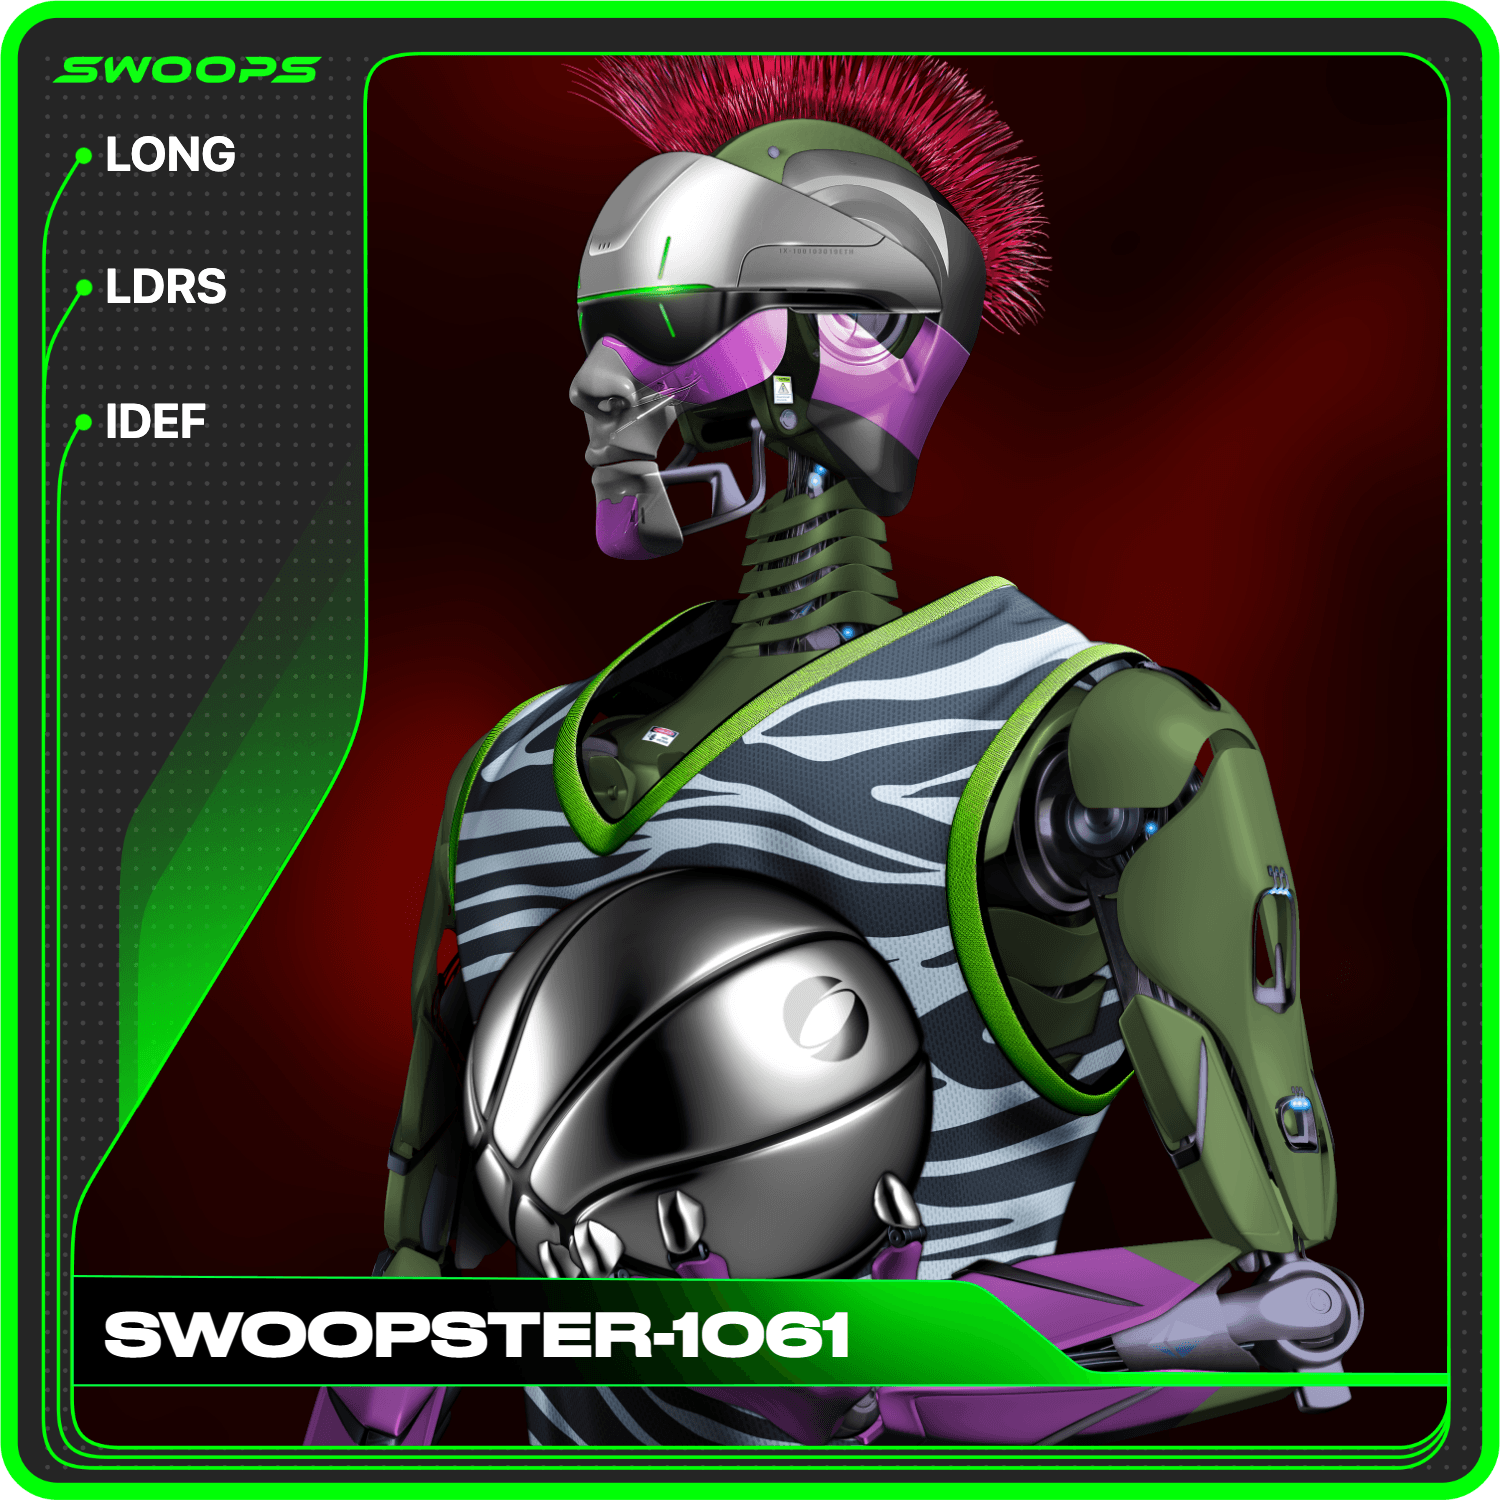 SWOOPSTER-1061